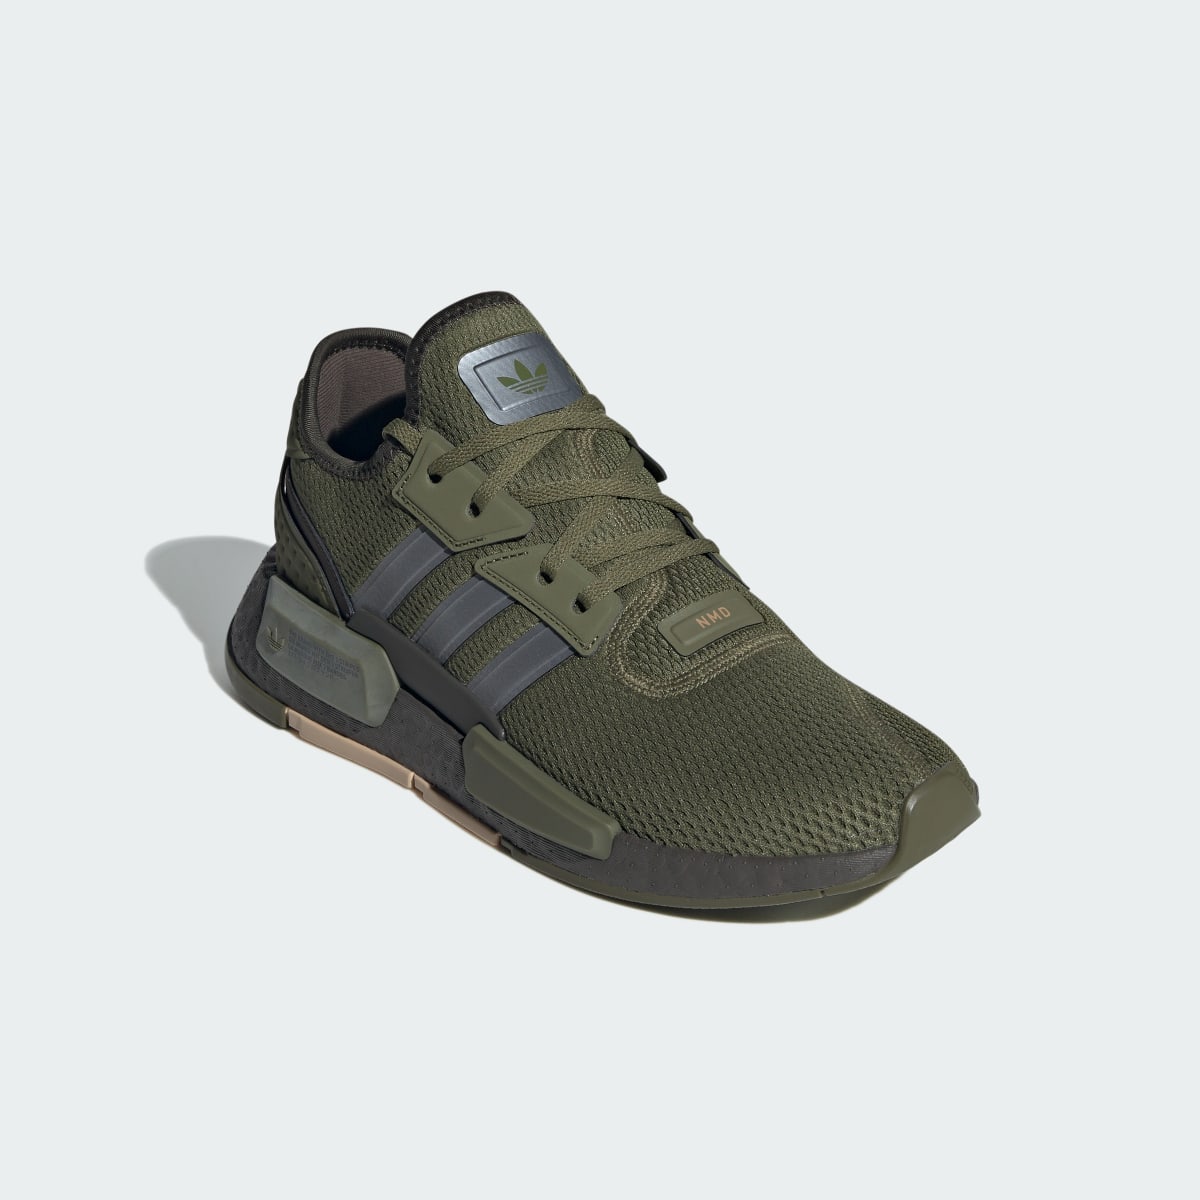 Adidas NMD_G1 Shoes. 7